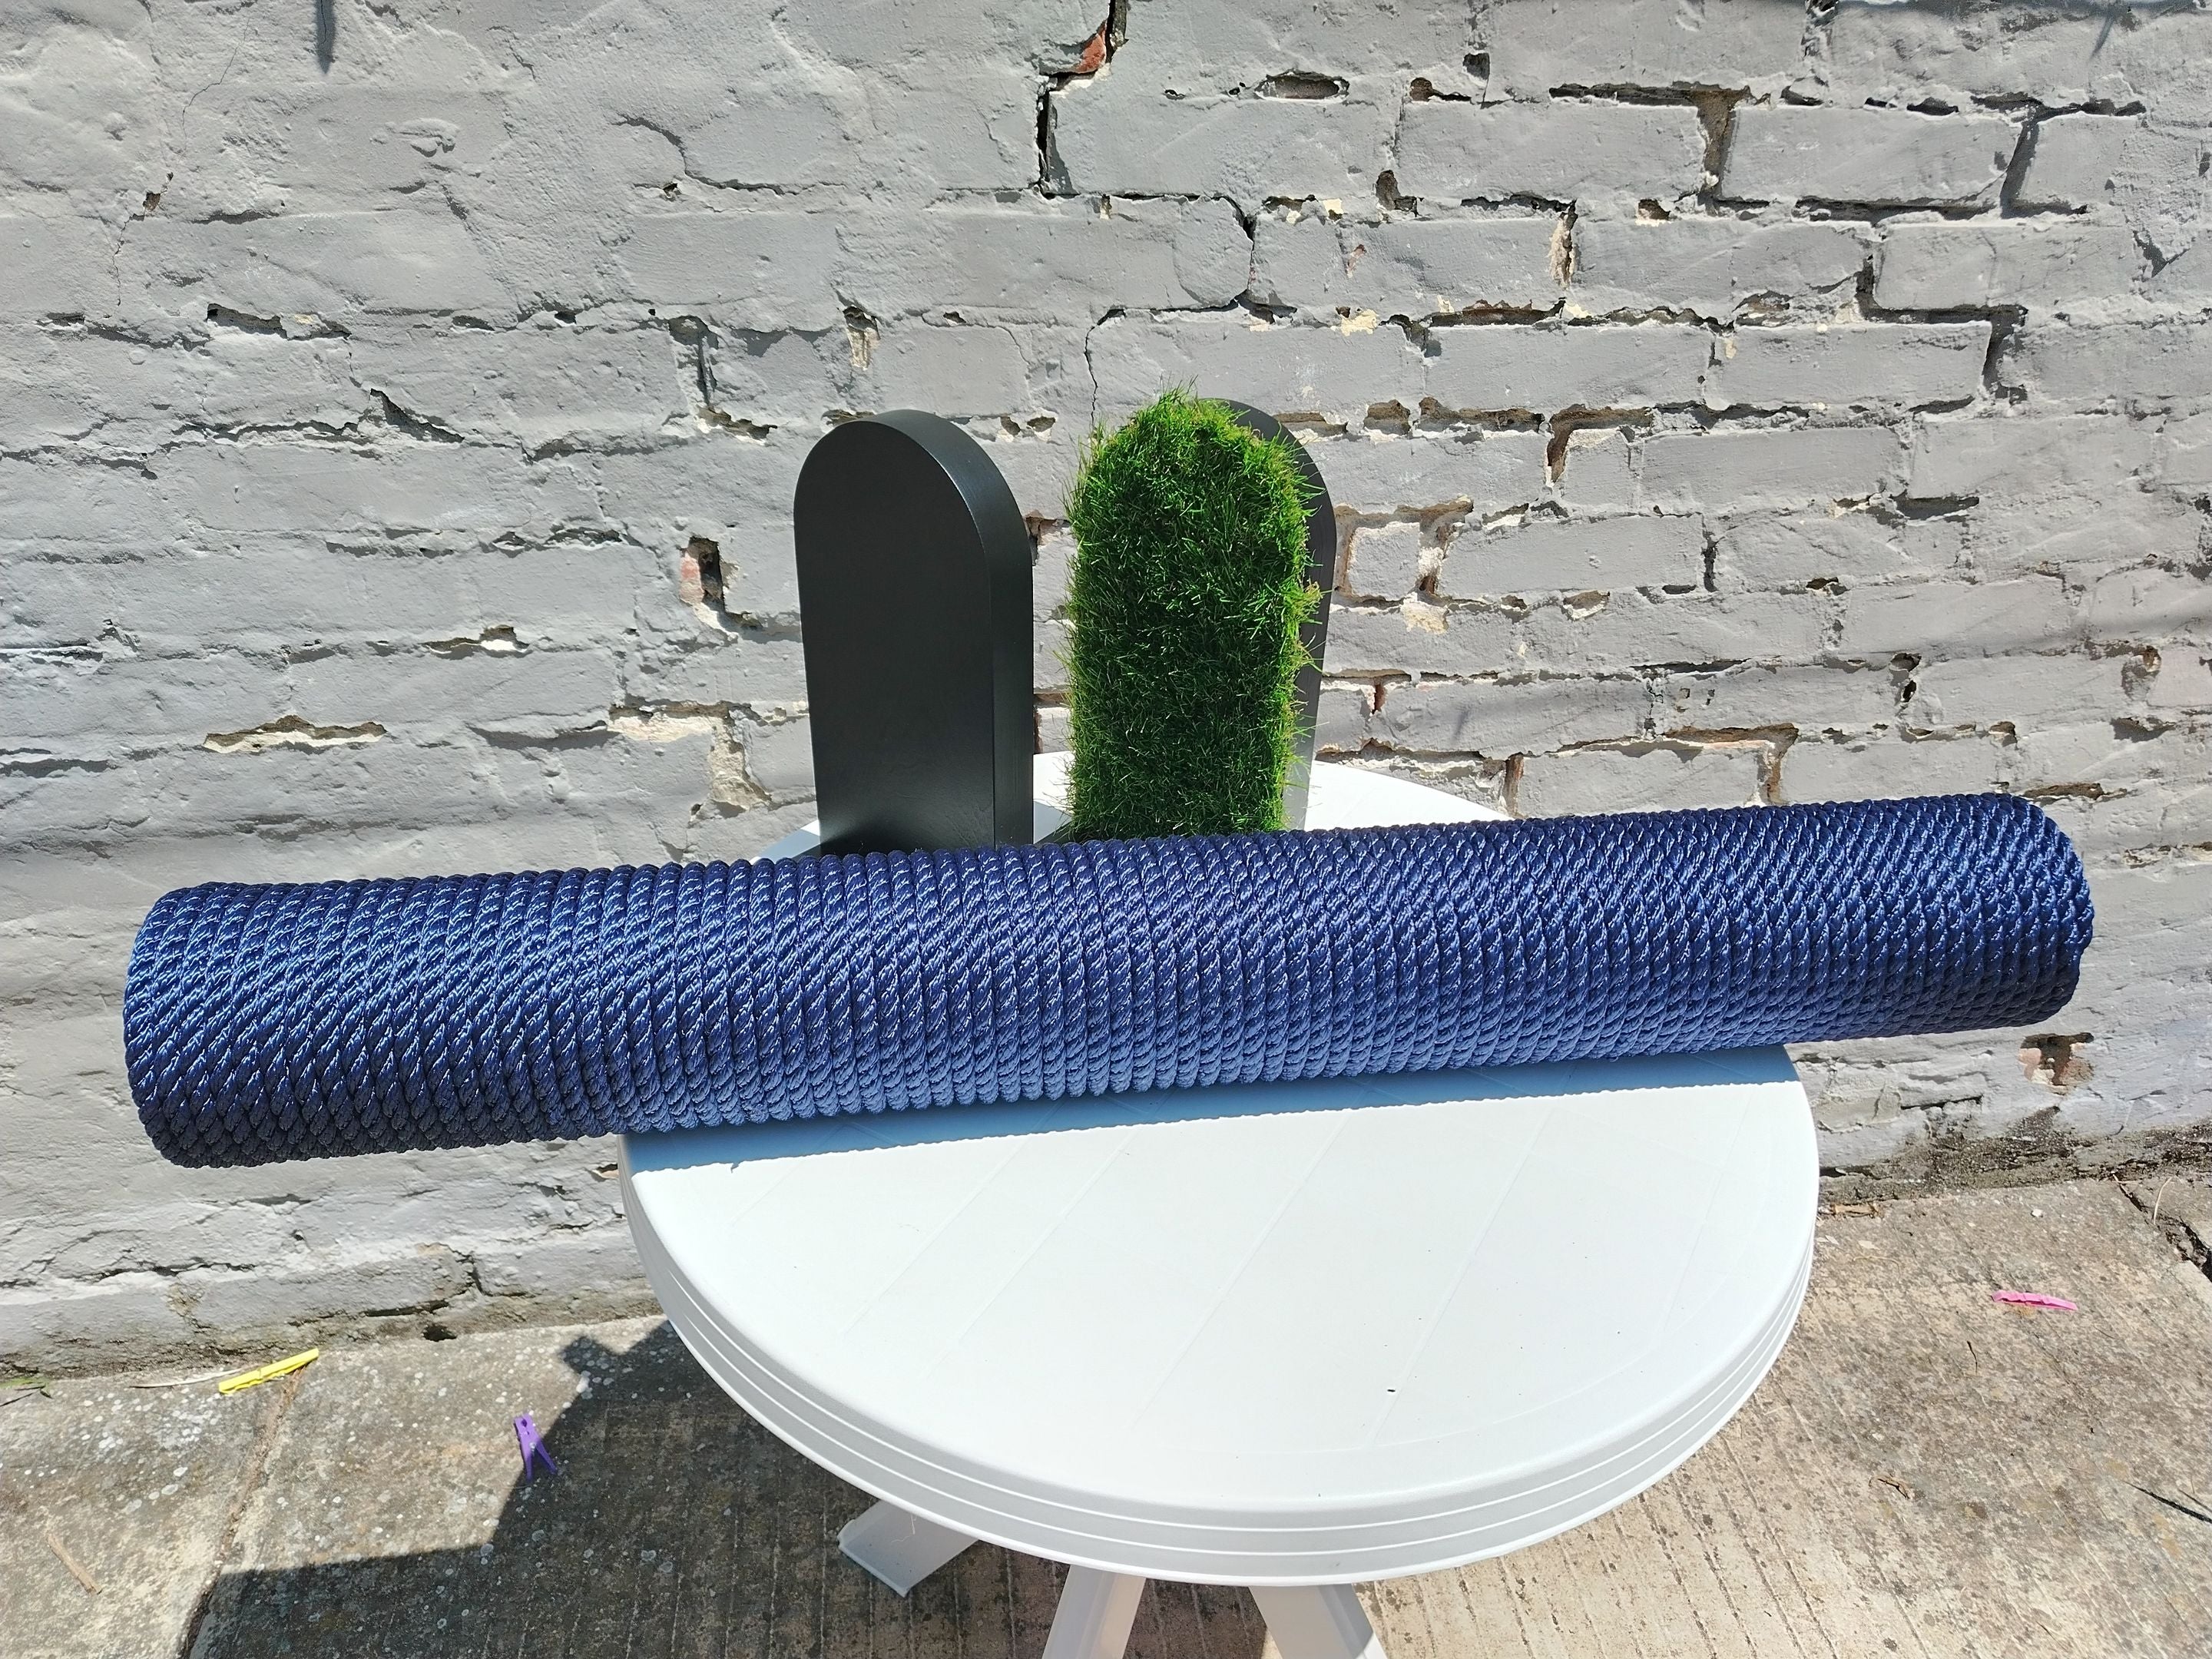 Catio Scratching Post - Outdoor cat scratching pole